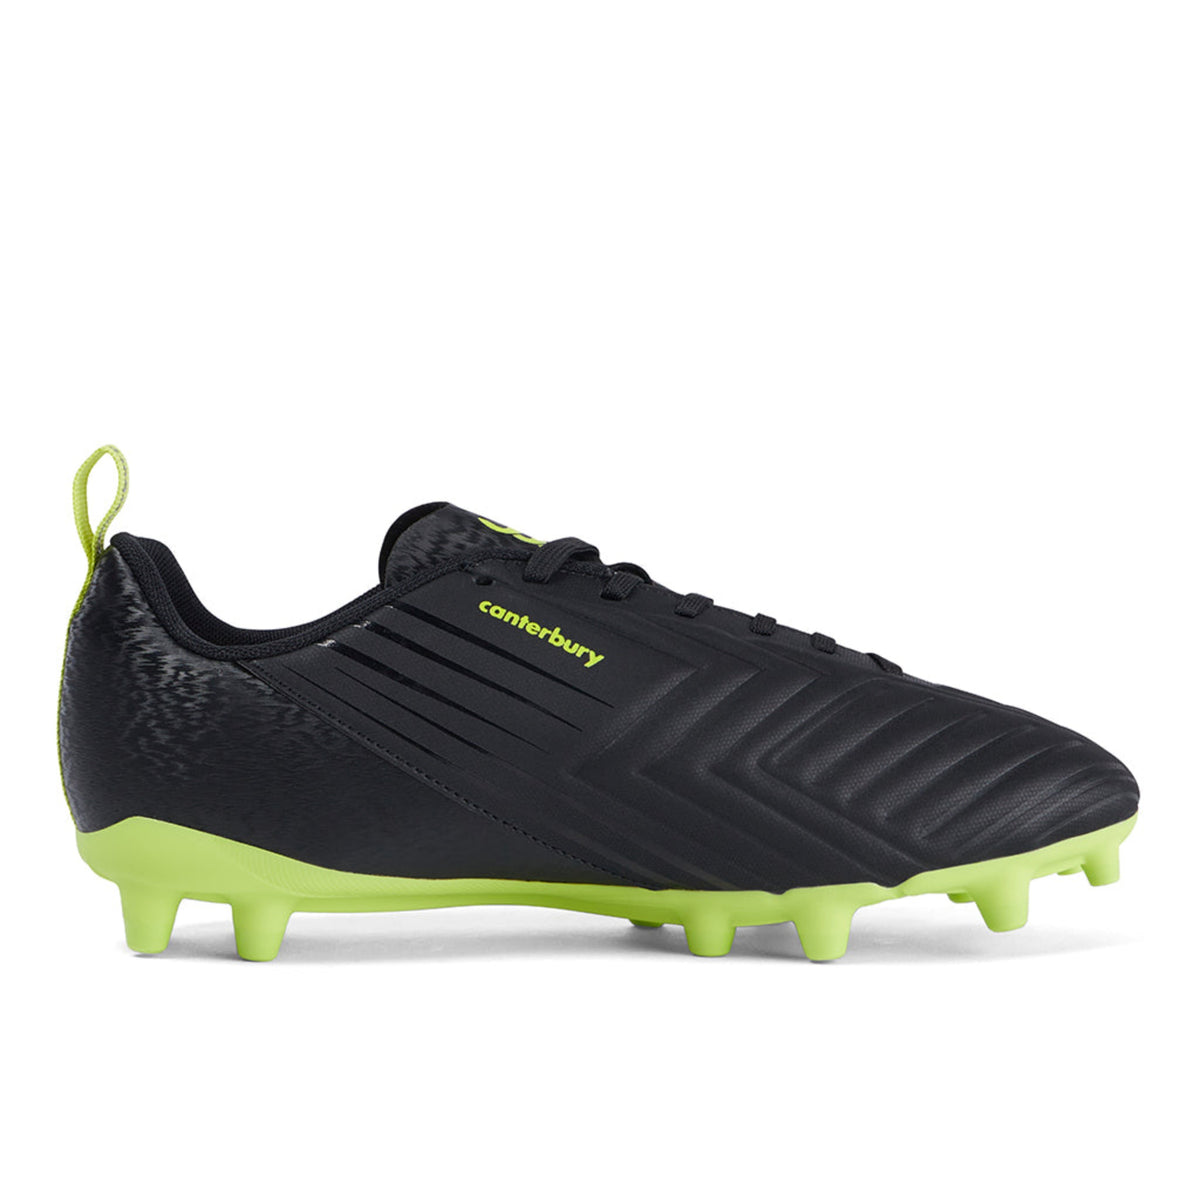 Canterbury Speed 3.0 FG Rugby Boots a High-Performance Quality CCC Rugby Cleat Black/Green Available in Unisex Sizing 6-16